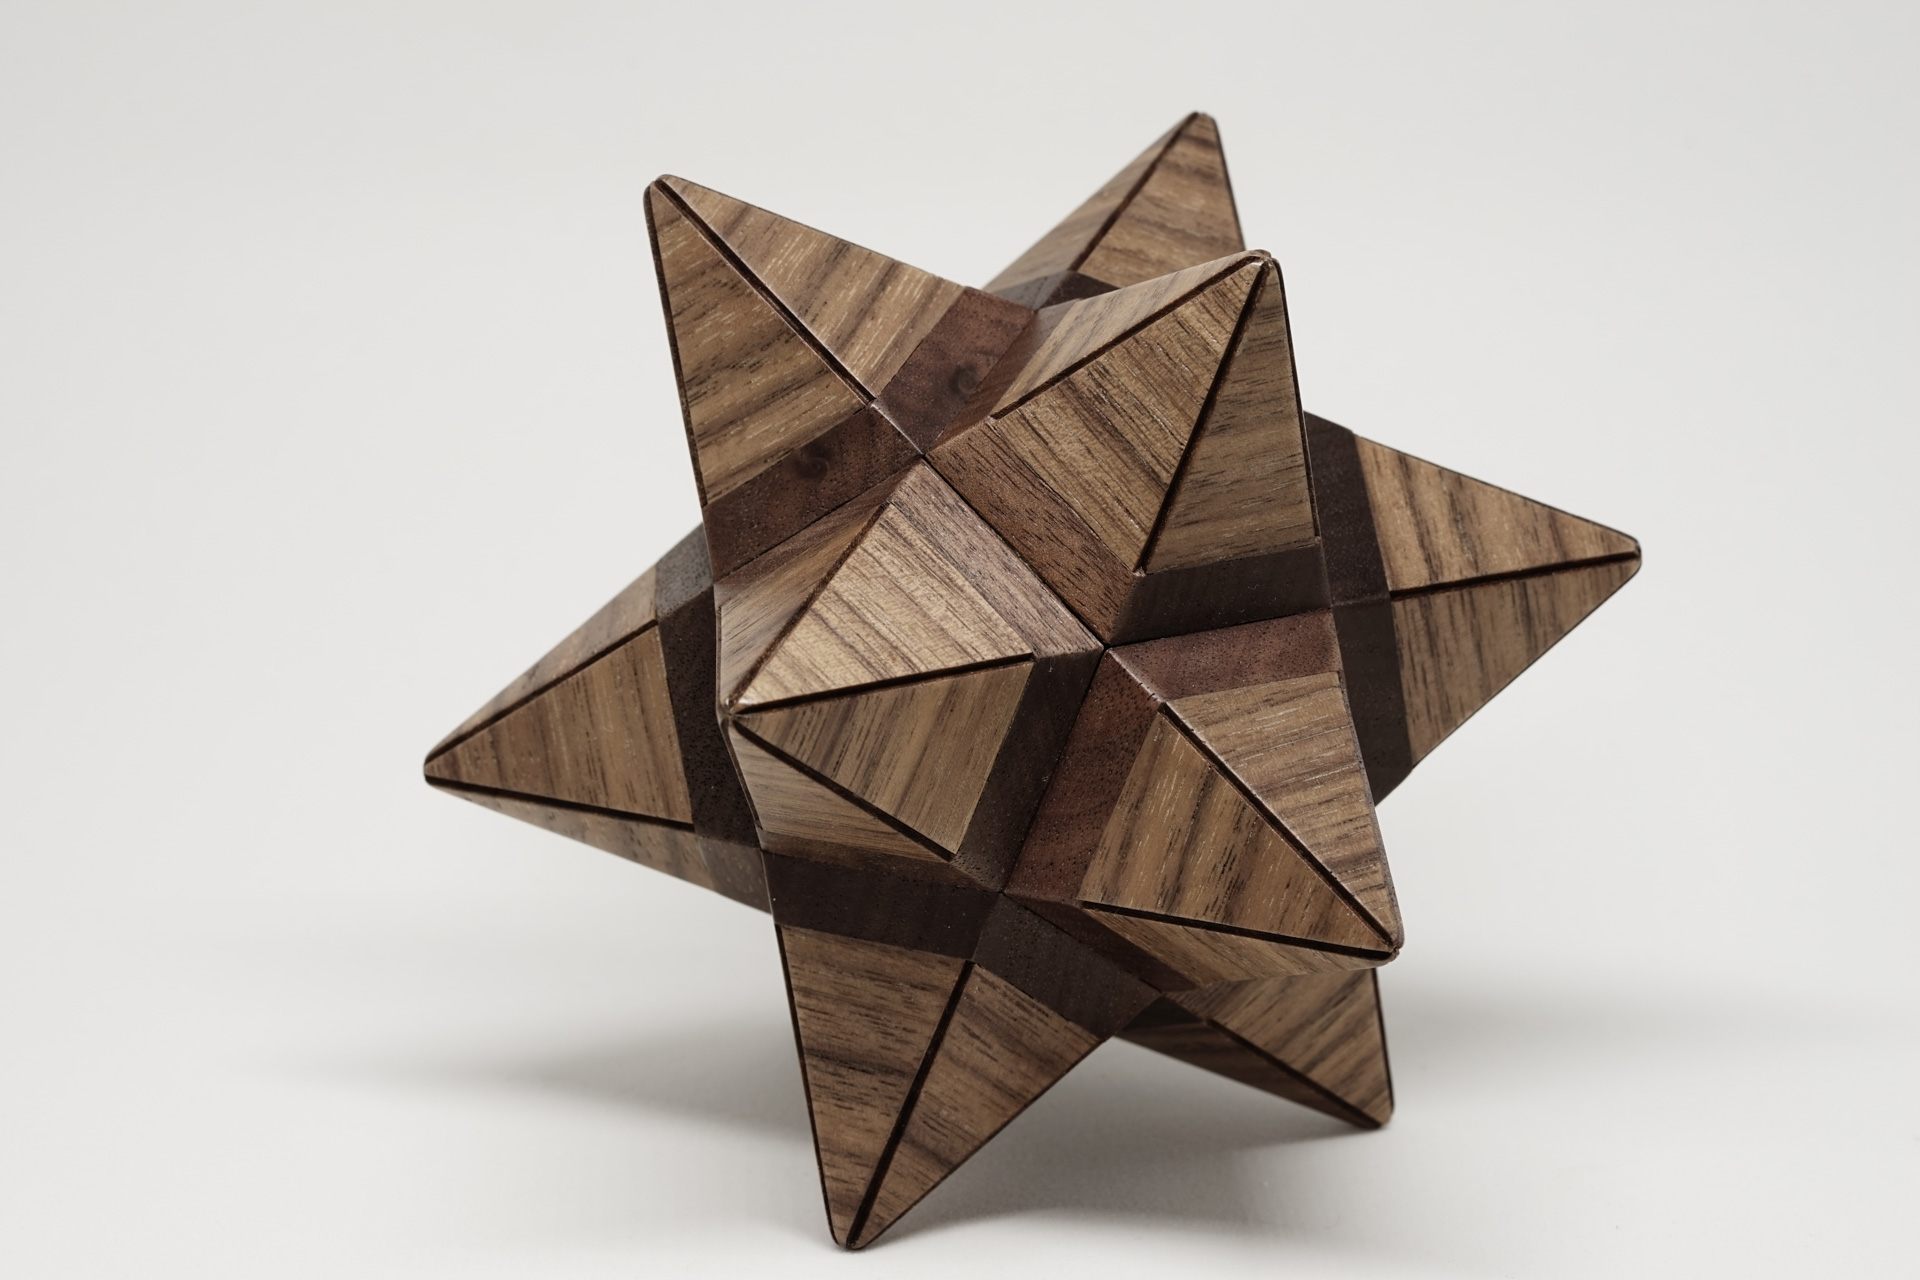 Small stellated dodecahedron secret box A